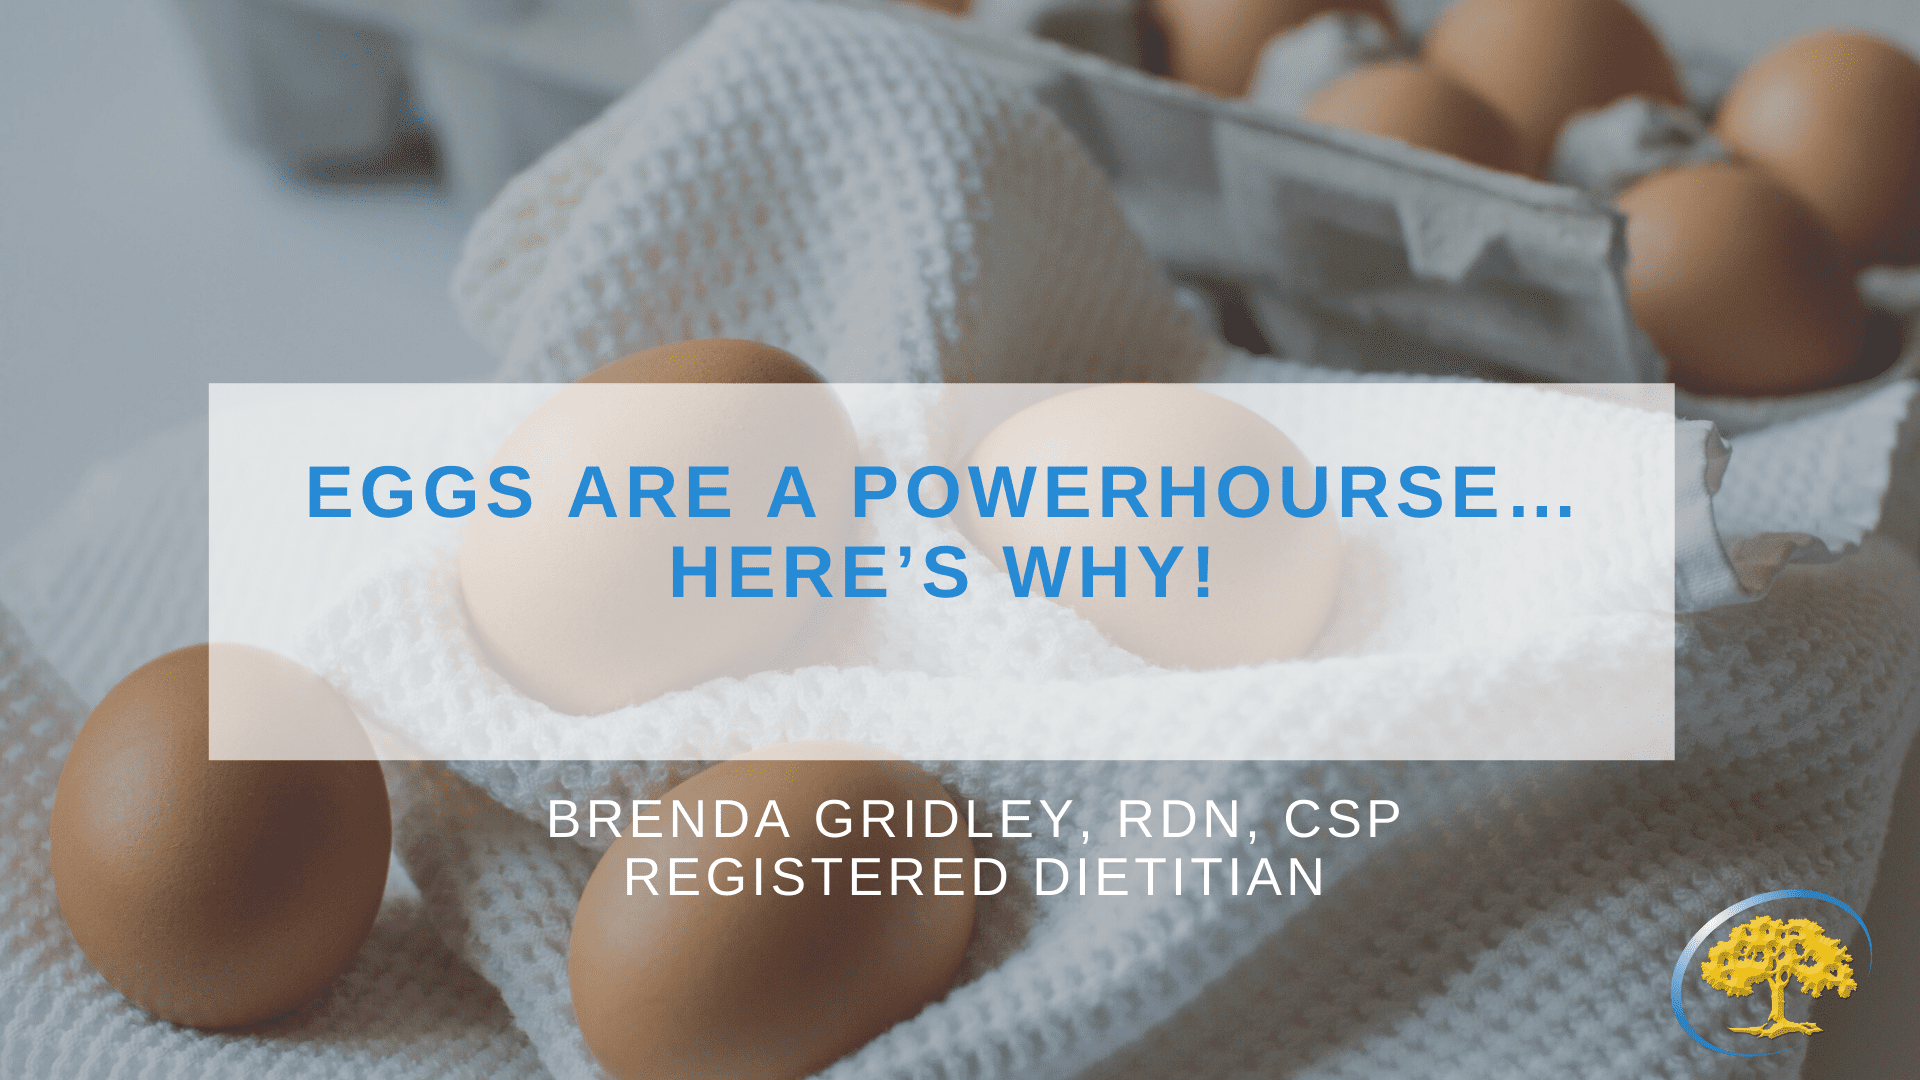 EGGS ARE A POWERHOUSE… HERE'S WHY! - Ironwood Cancer & Research Centers